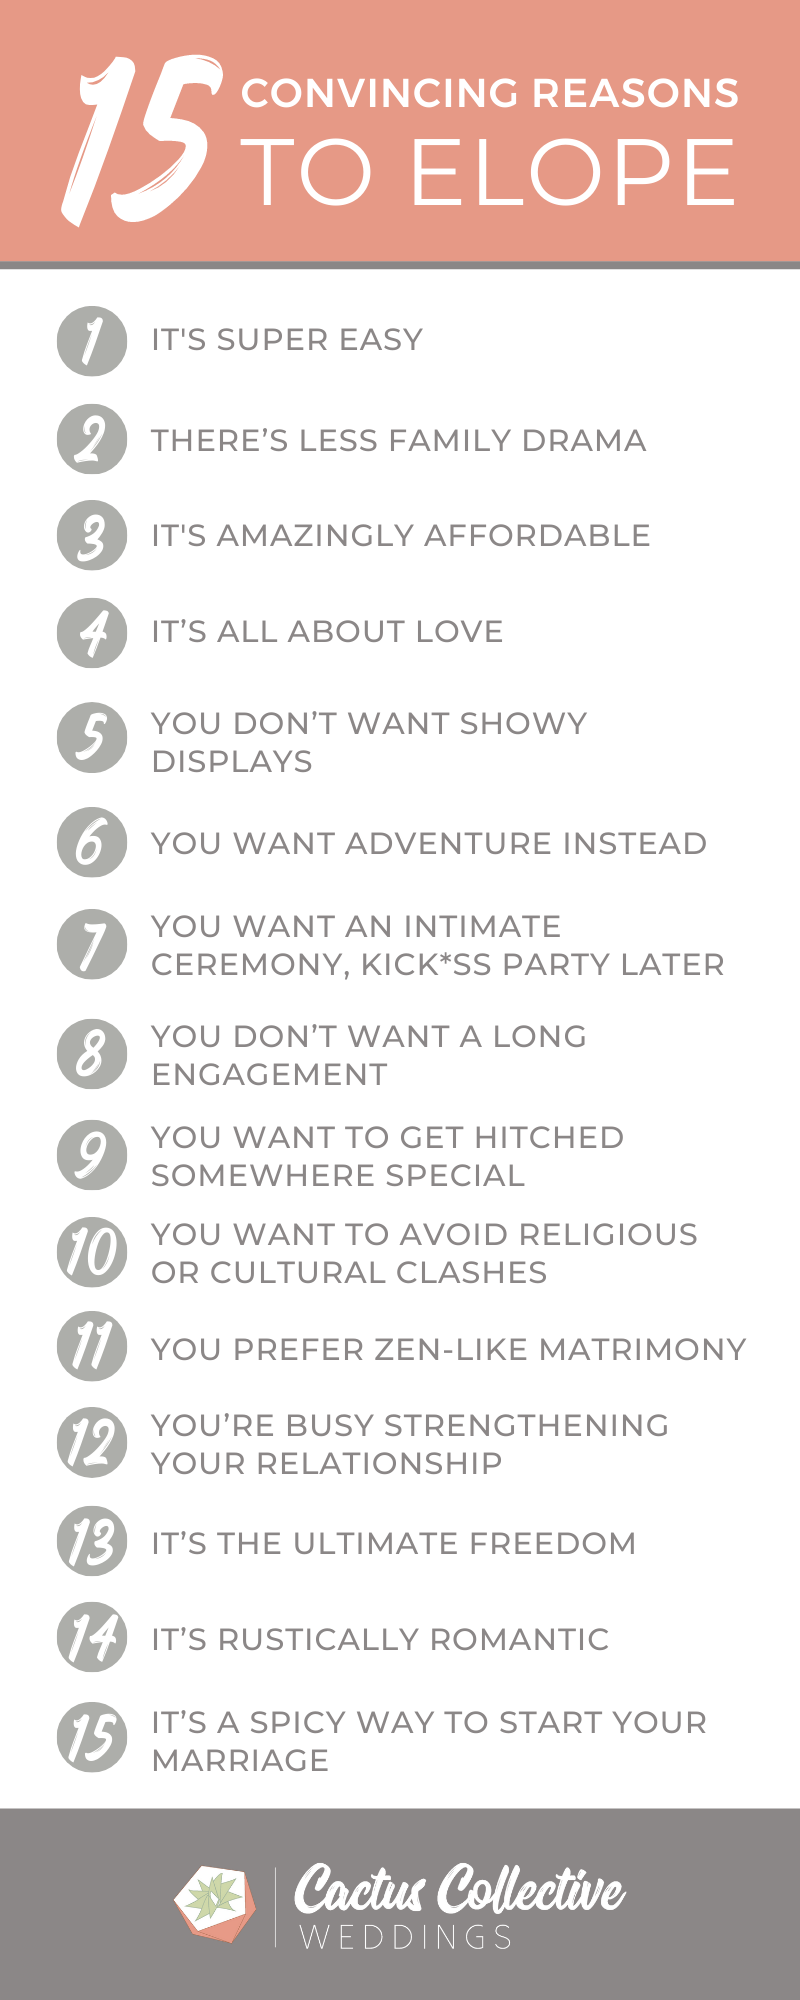 Infographic of 15 convincing reasons to elope.